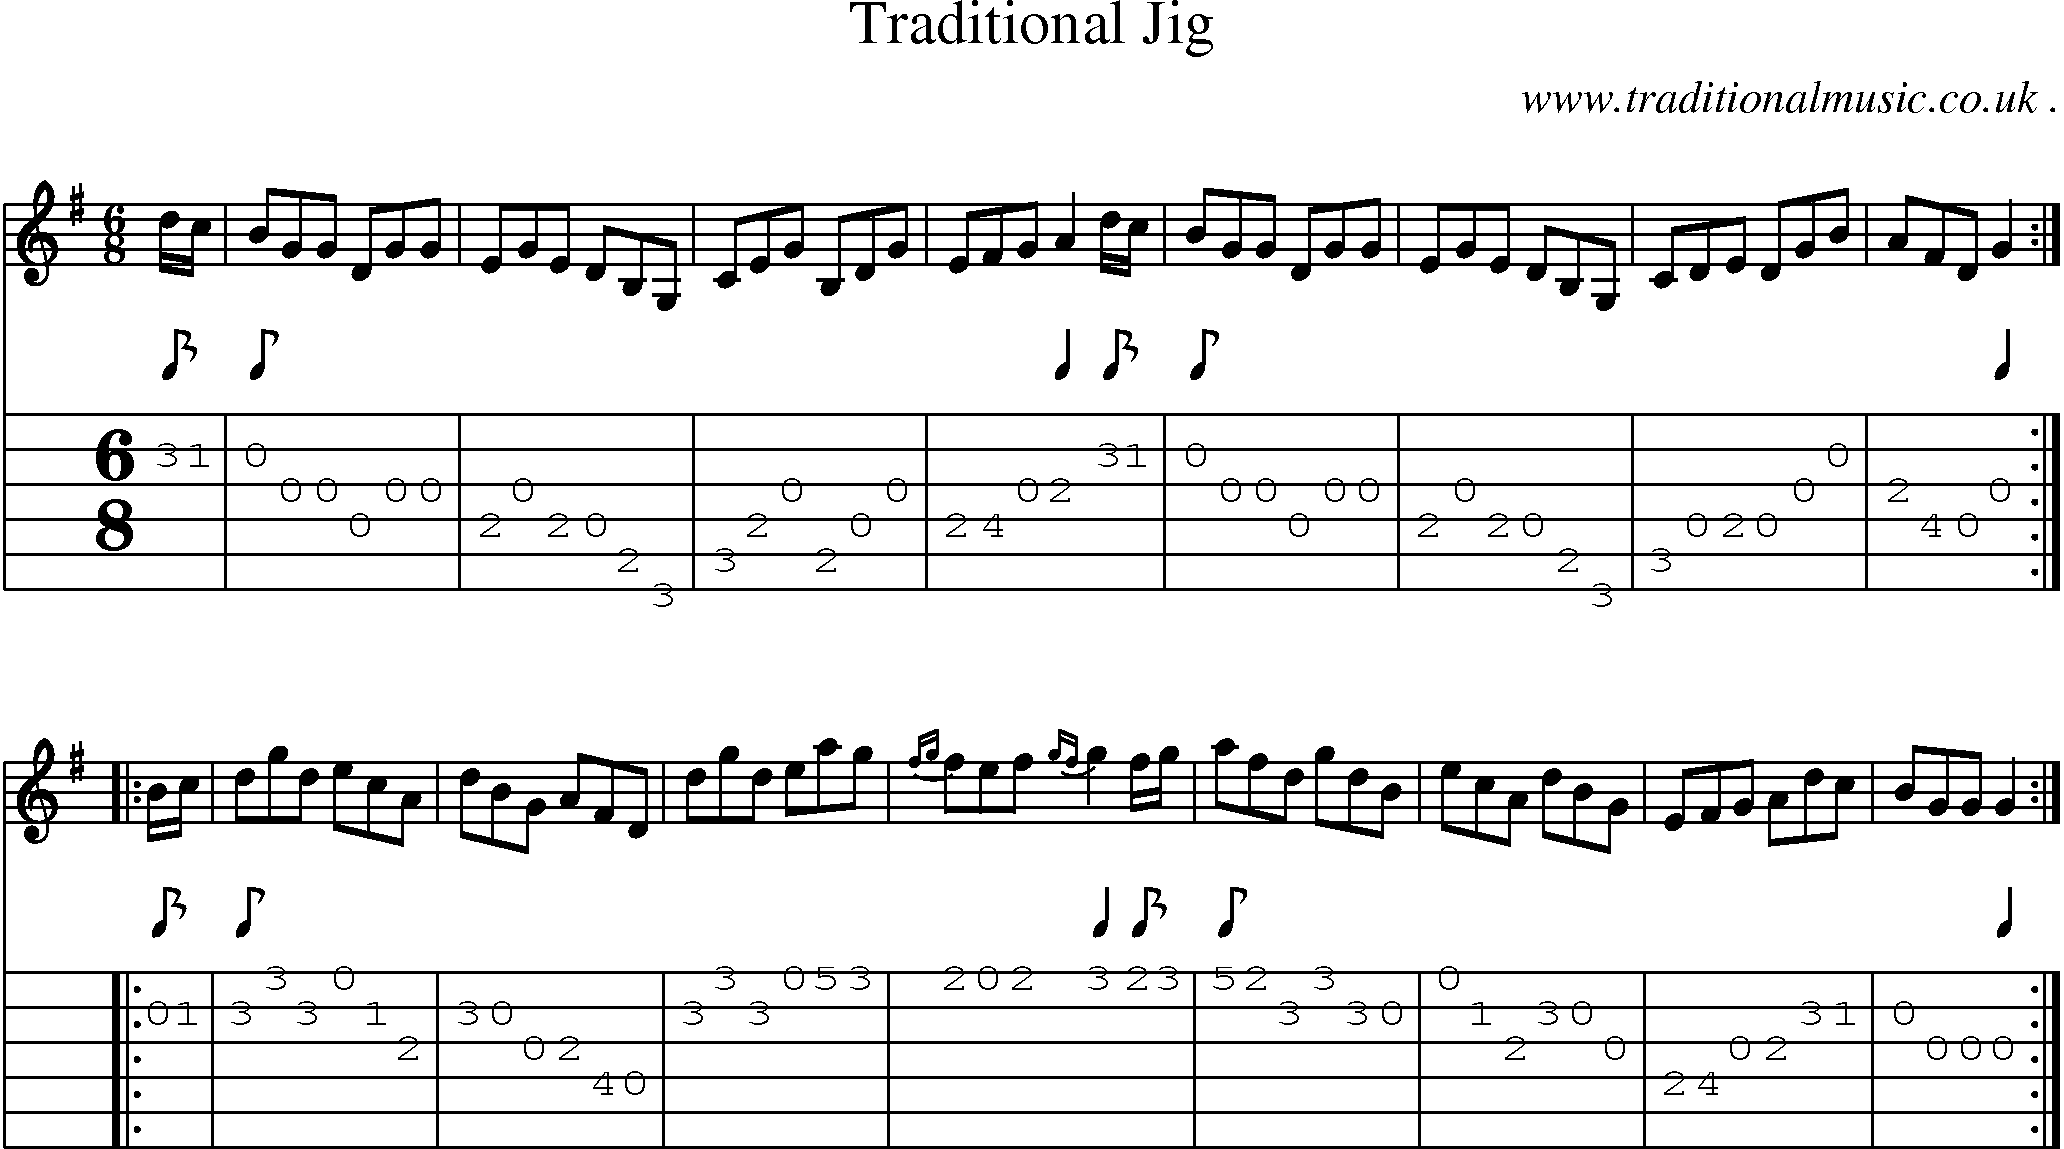 Sheet-music  score, Chords and Guitar Tabs for Traditional Jig